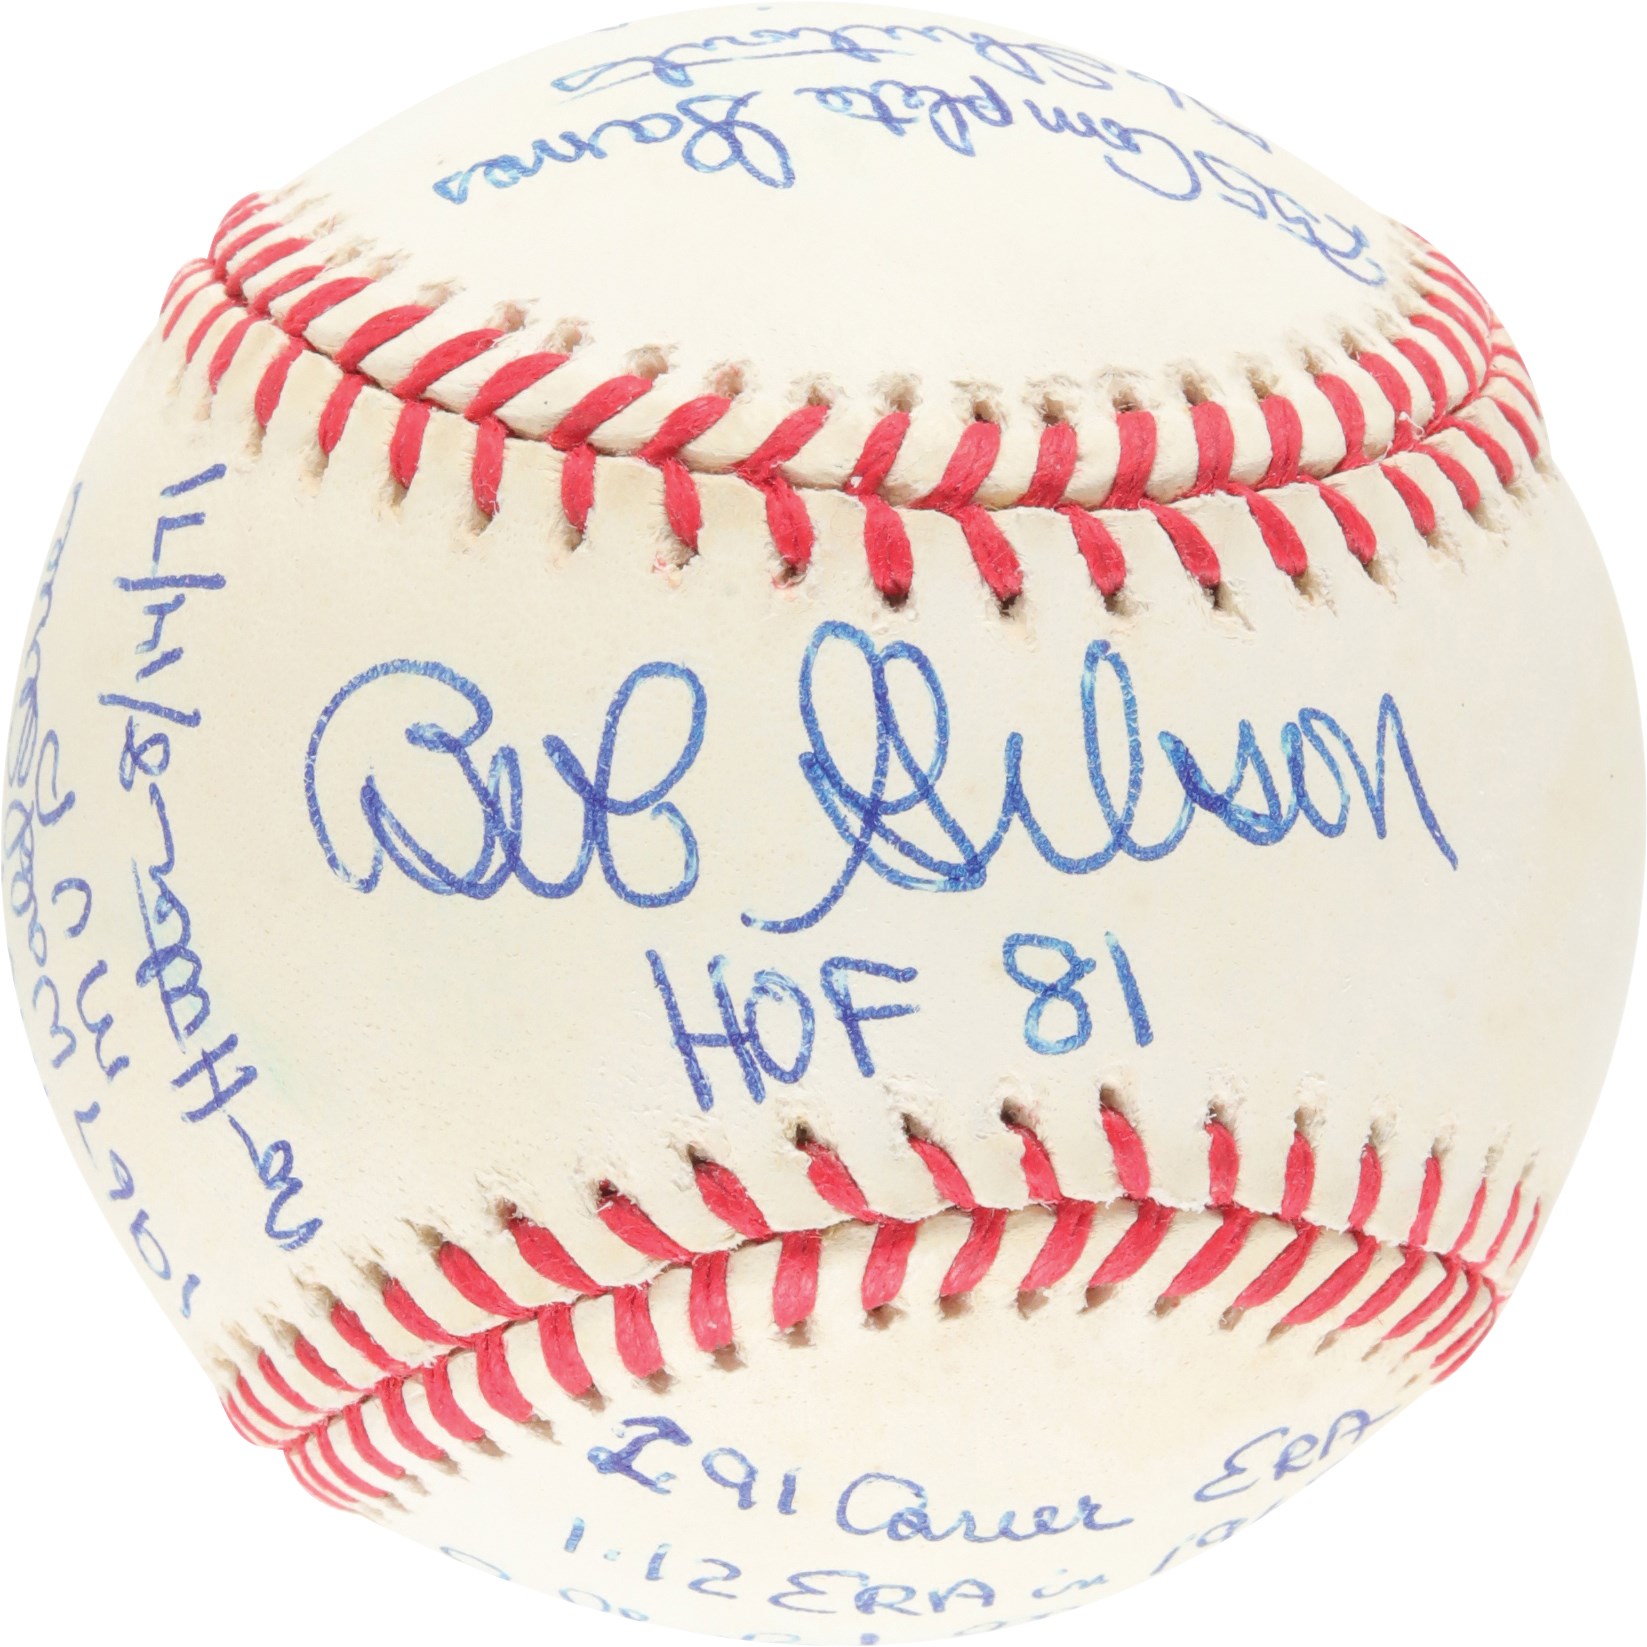 St. Louis Cardinals - Bob Gibson Signed and 16x Inscribed Stat Baseball